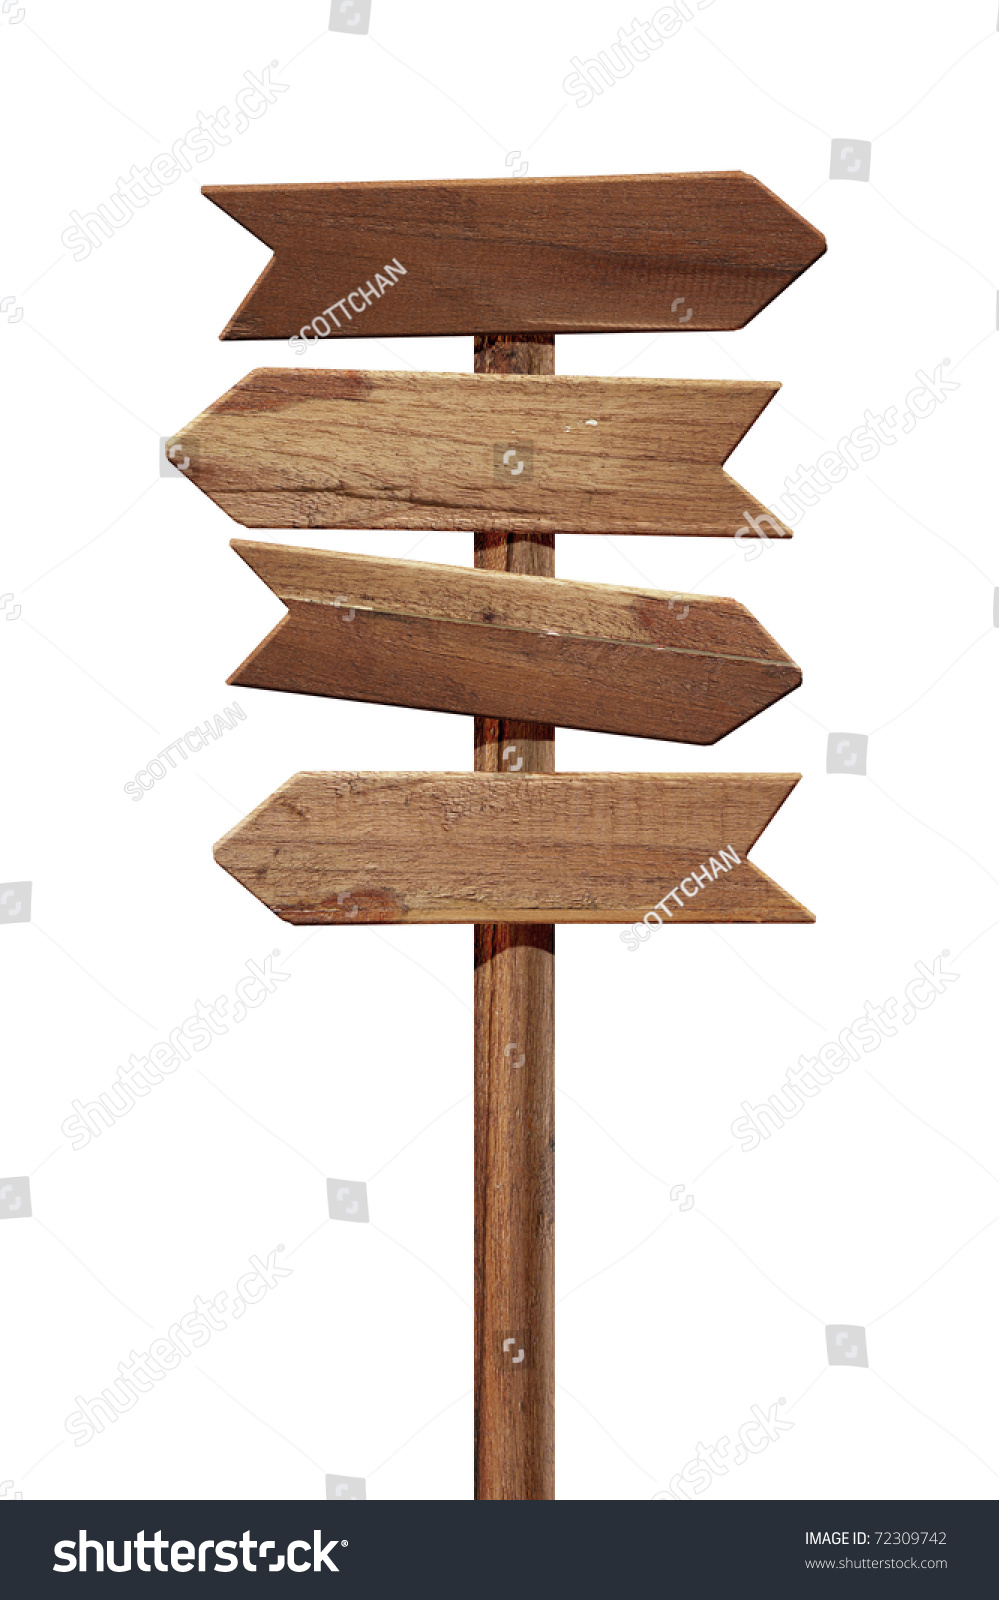 Arrows road sign isolated on white #72309742